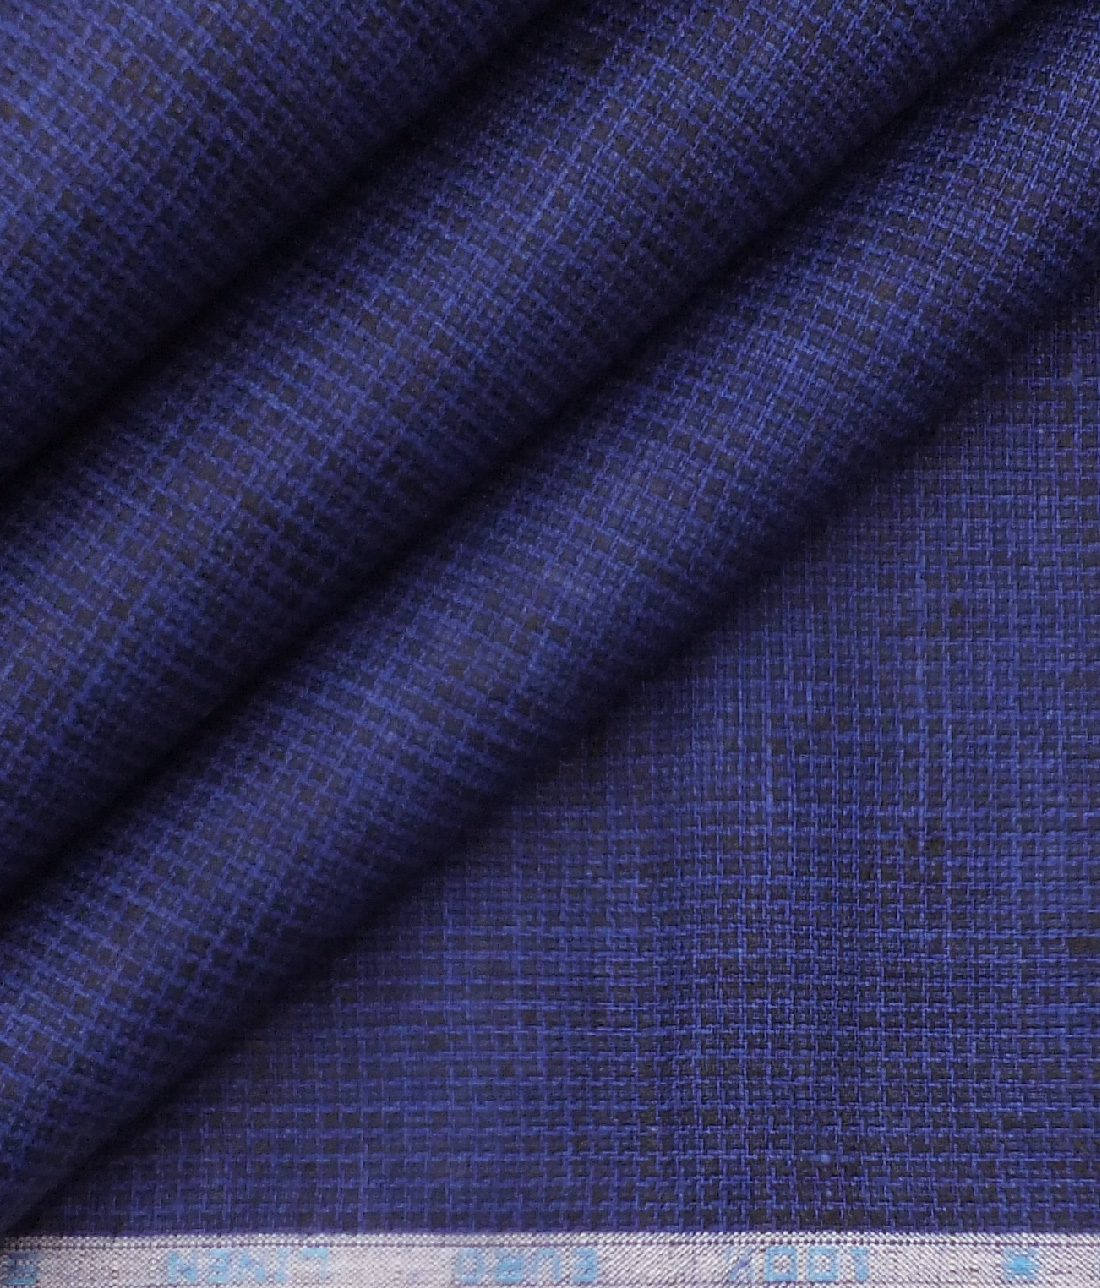 Solino Dark Bright Royal Blue 100% Euro Linen Houndstooth Weave Trouser Fabric (1.30 M)